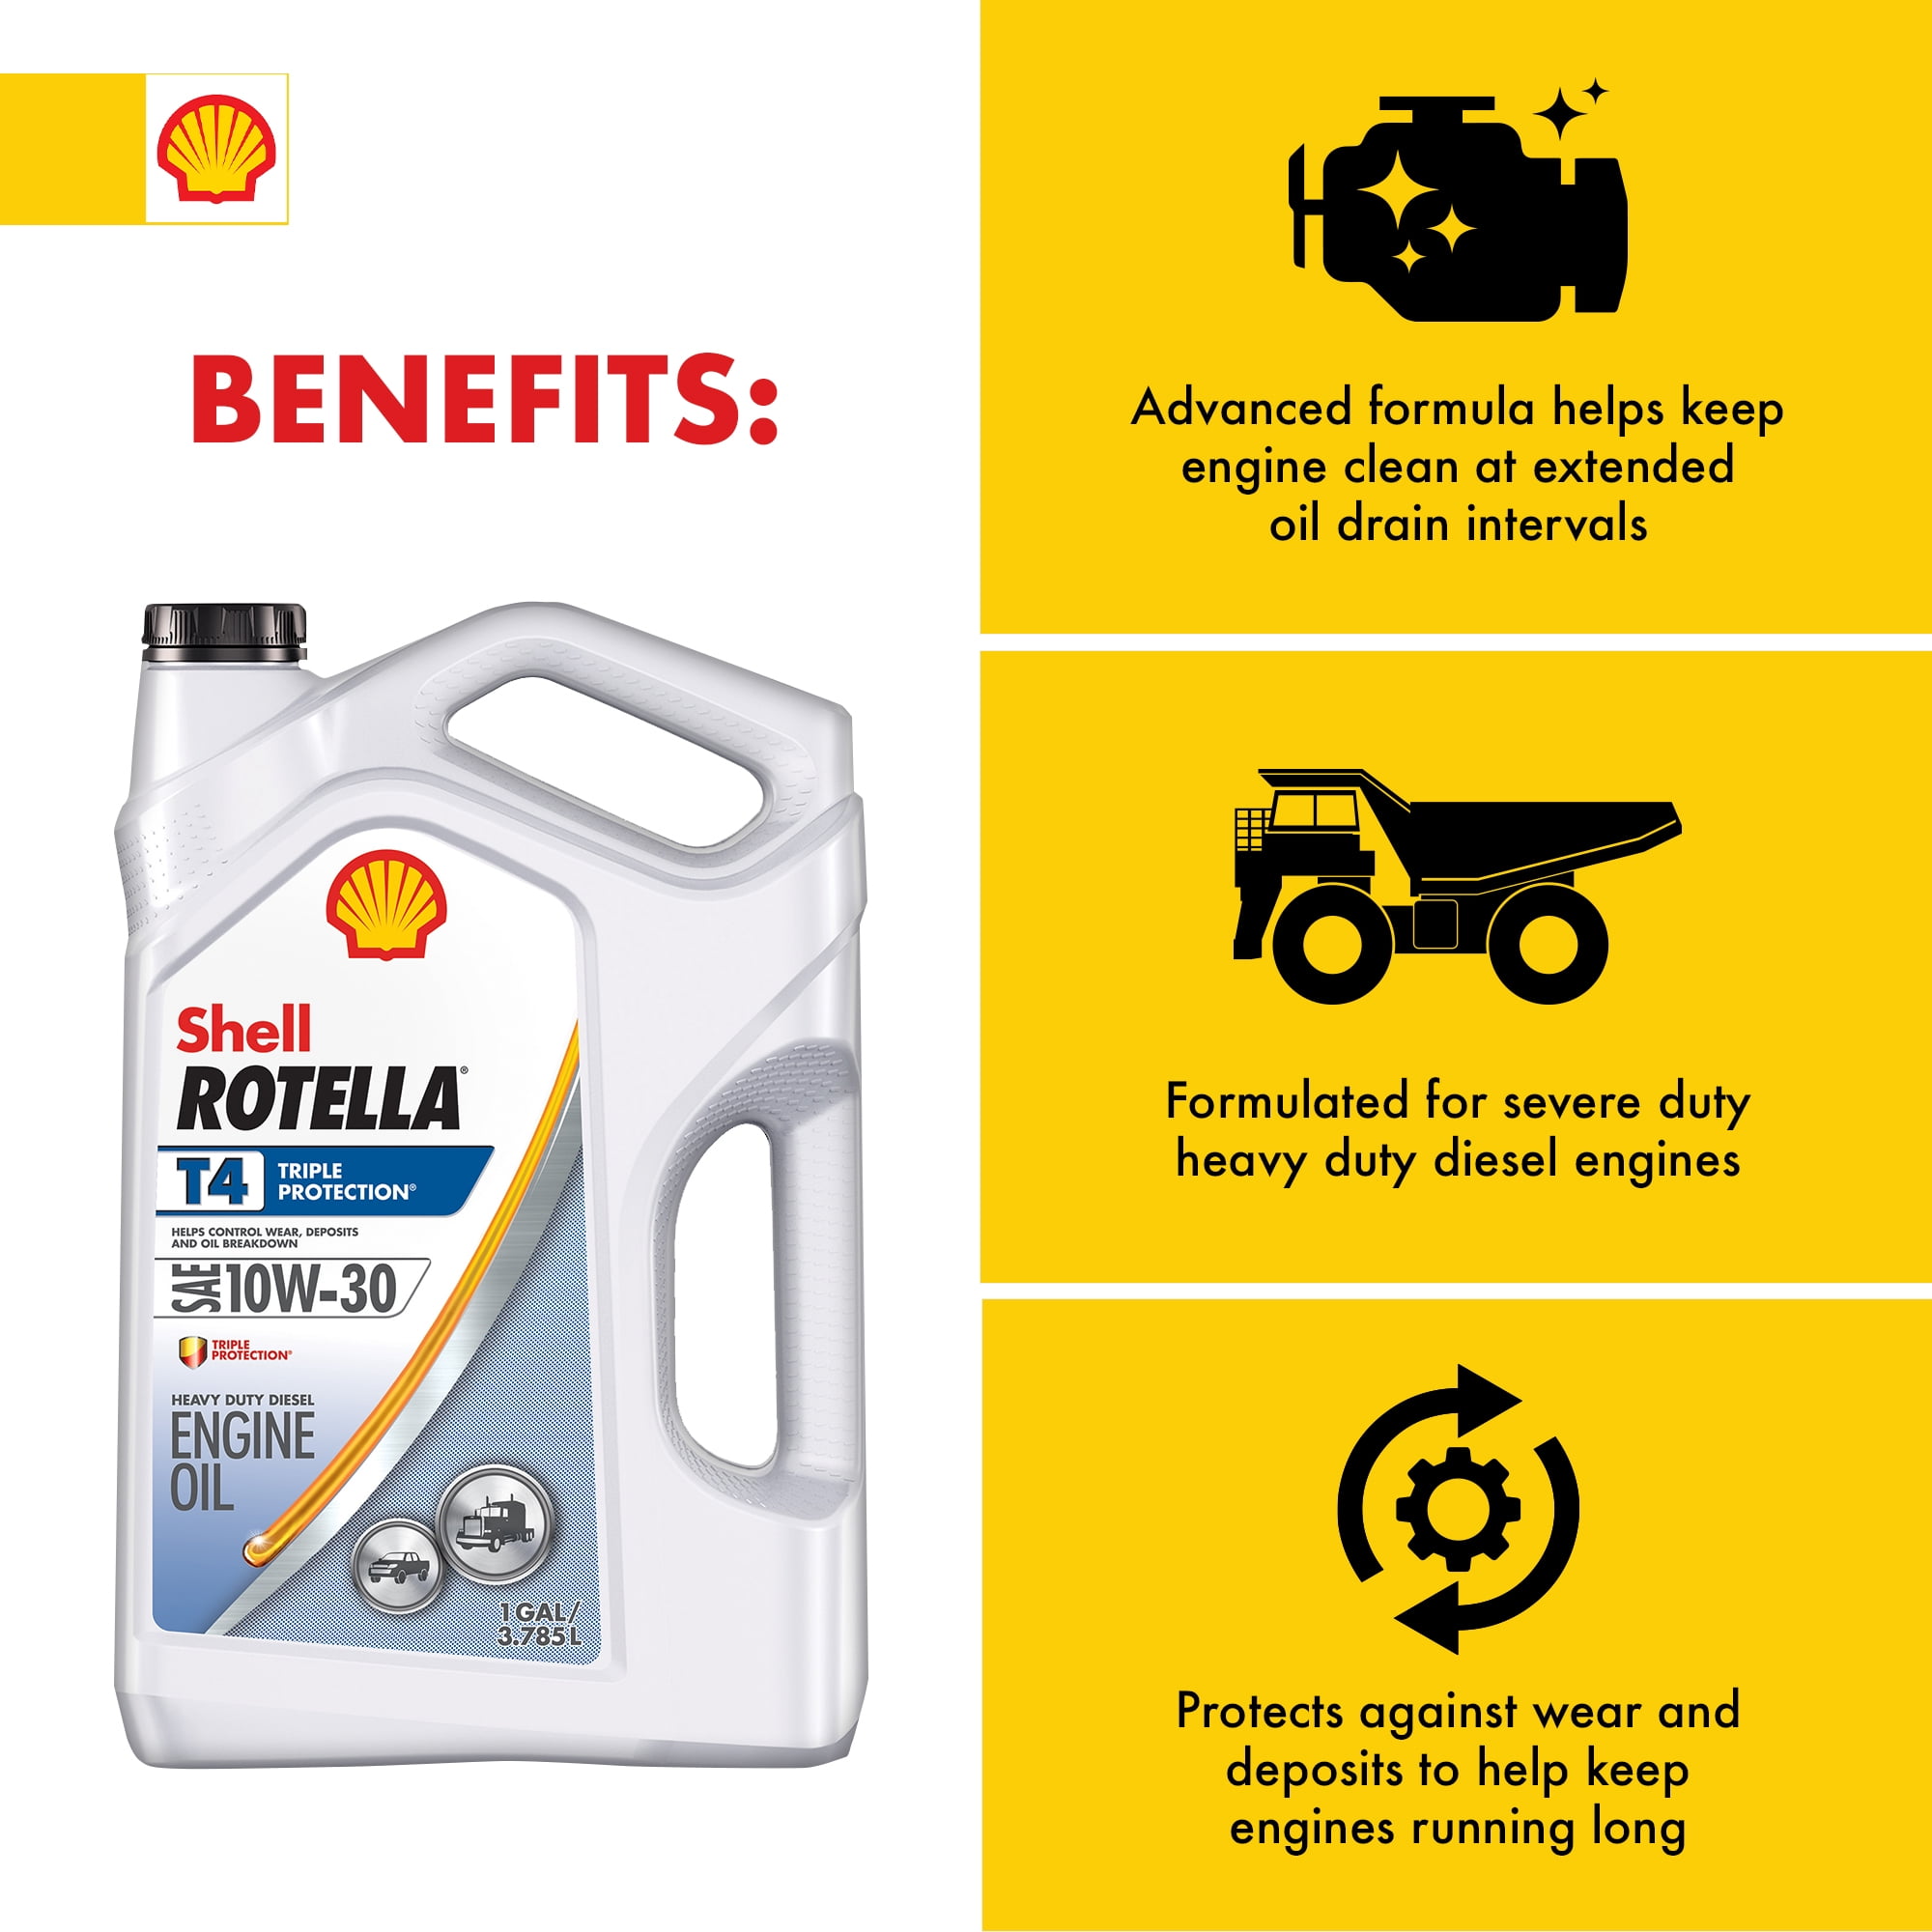 Shell Rotella T4 Triple Protection 10W-30 Diesel Motor Oil, 1 Gallon - 1